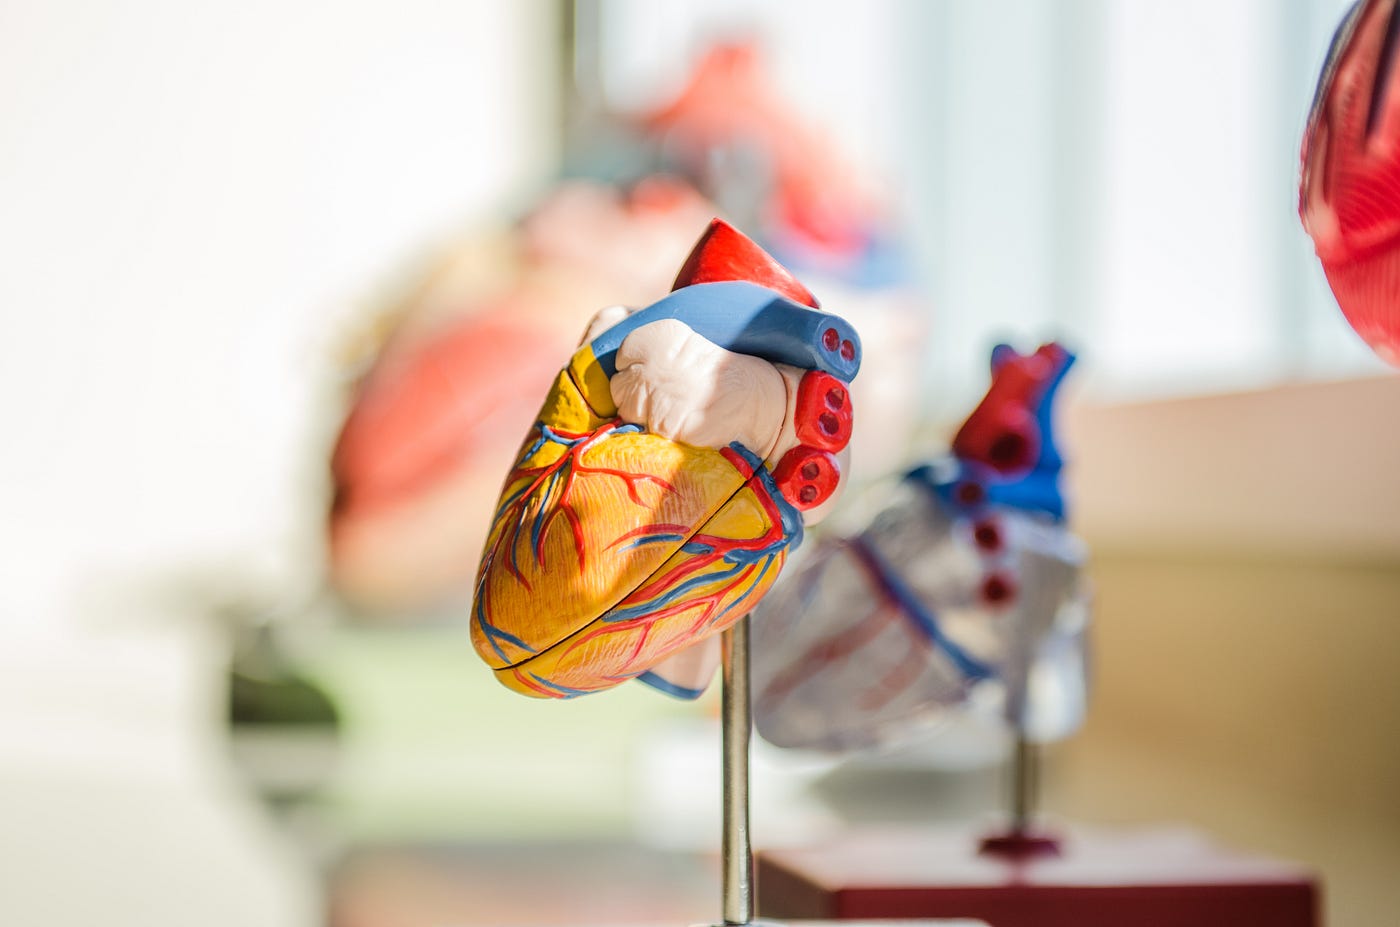 An anatomical model of a heart, propped up on a metal rod. sexual activity can strain your heart. If you have a heart problem or think you might have one, please speak to your healthcare provider. According to drugs.com, Eroxon® is well tolerated, with three percent of men reporting a headache and one percent of men and 0.4 percent of their female partners experiencing a “localized burning sensation.”